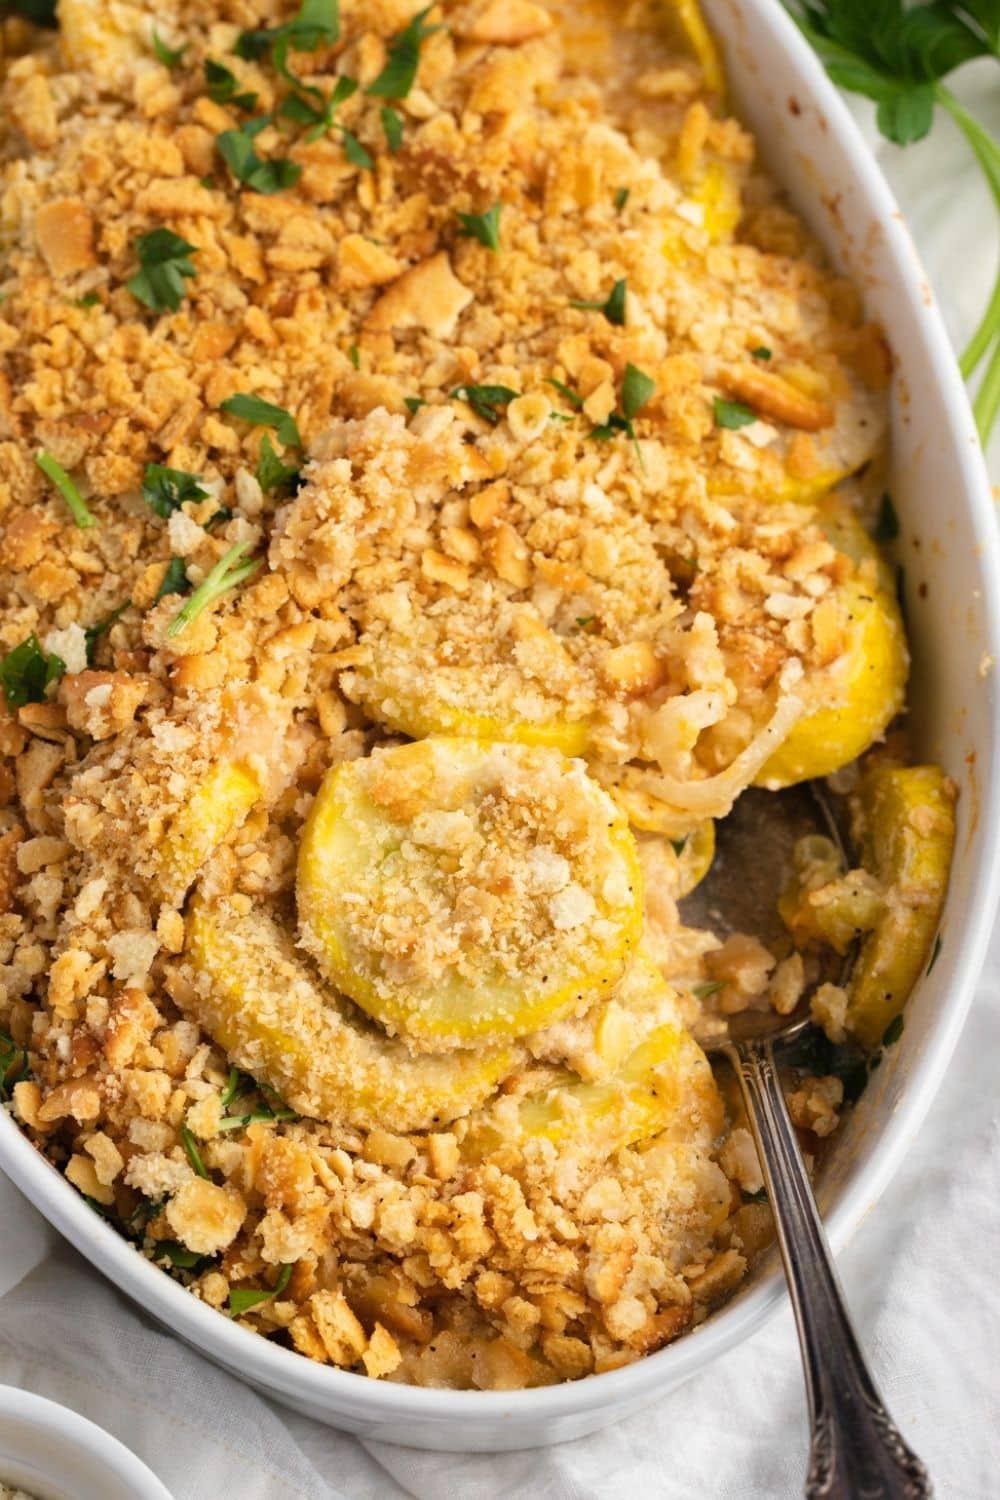 Top View of Paula Deen’s Squash Casserole With Serving Spoon